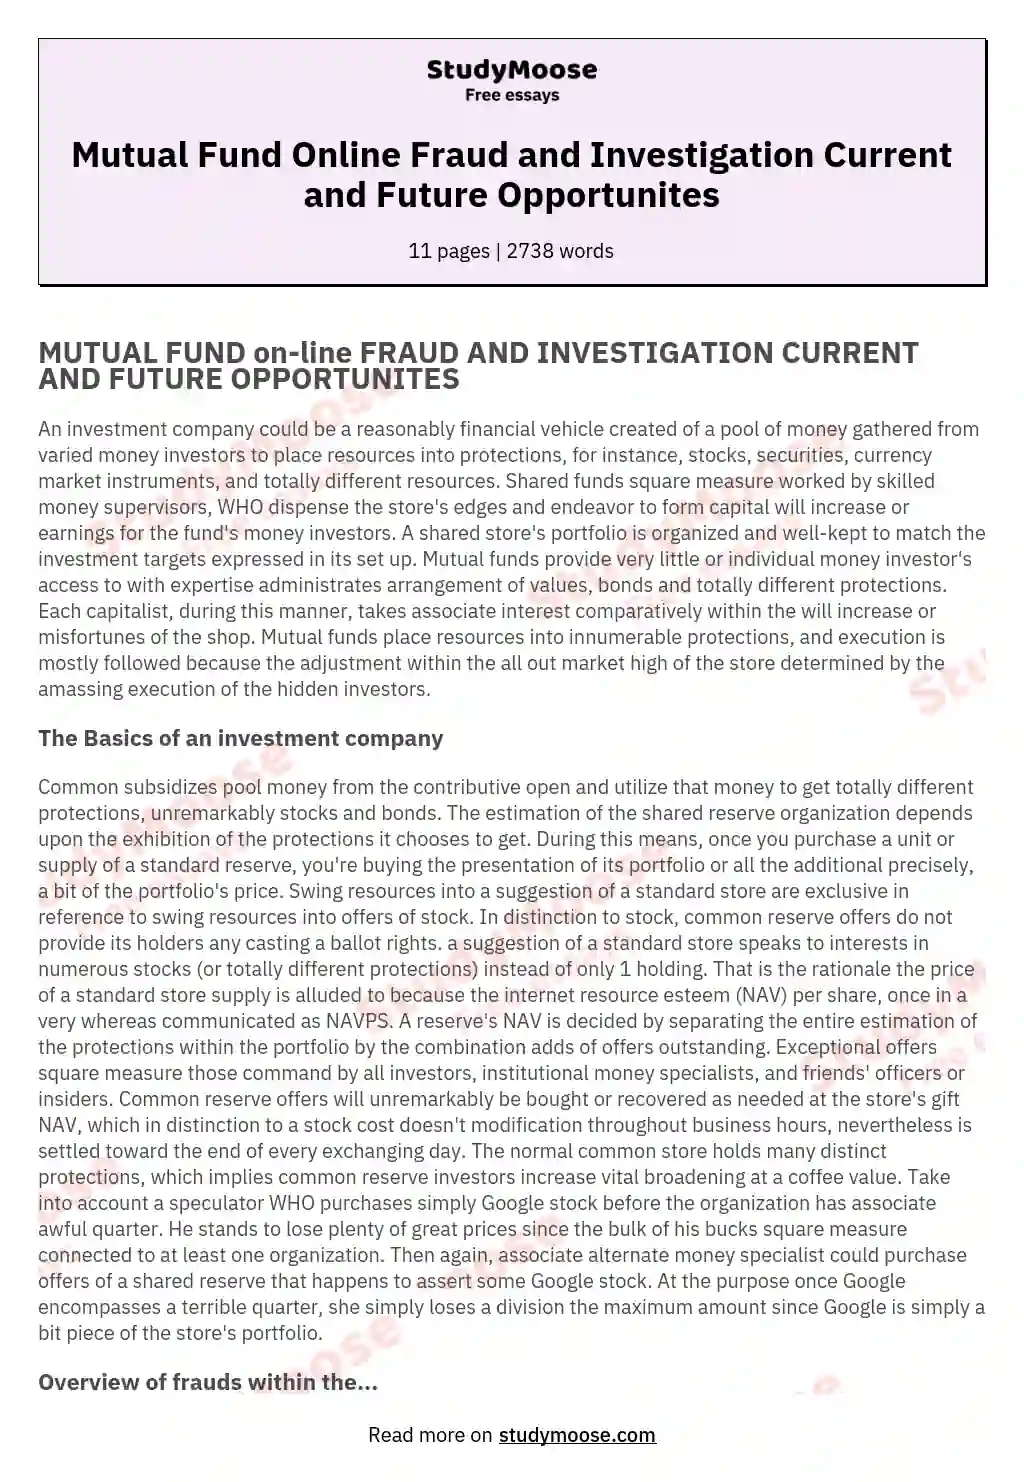 Mutual Fund Online Fraud and Investigation Current and Future Opportunites